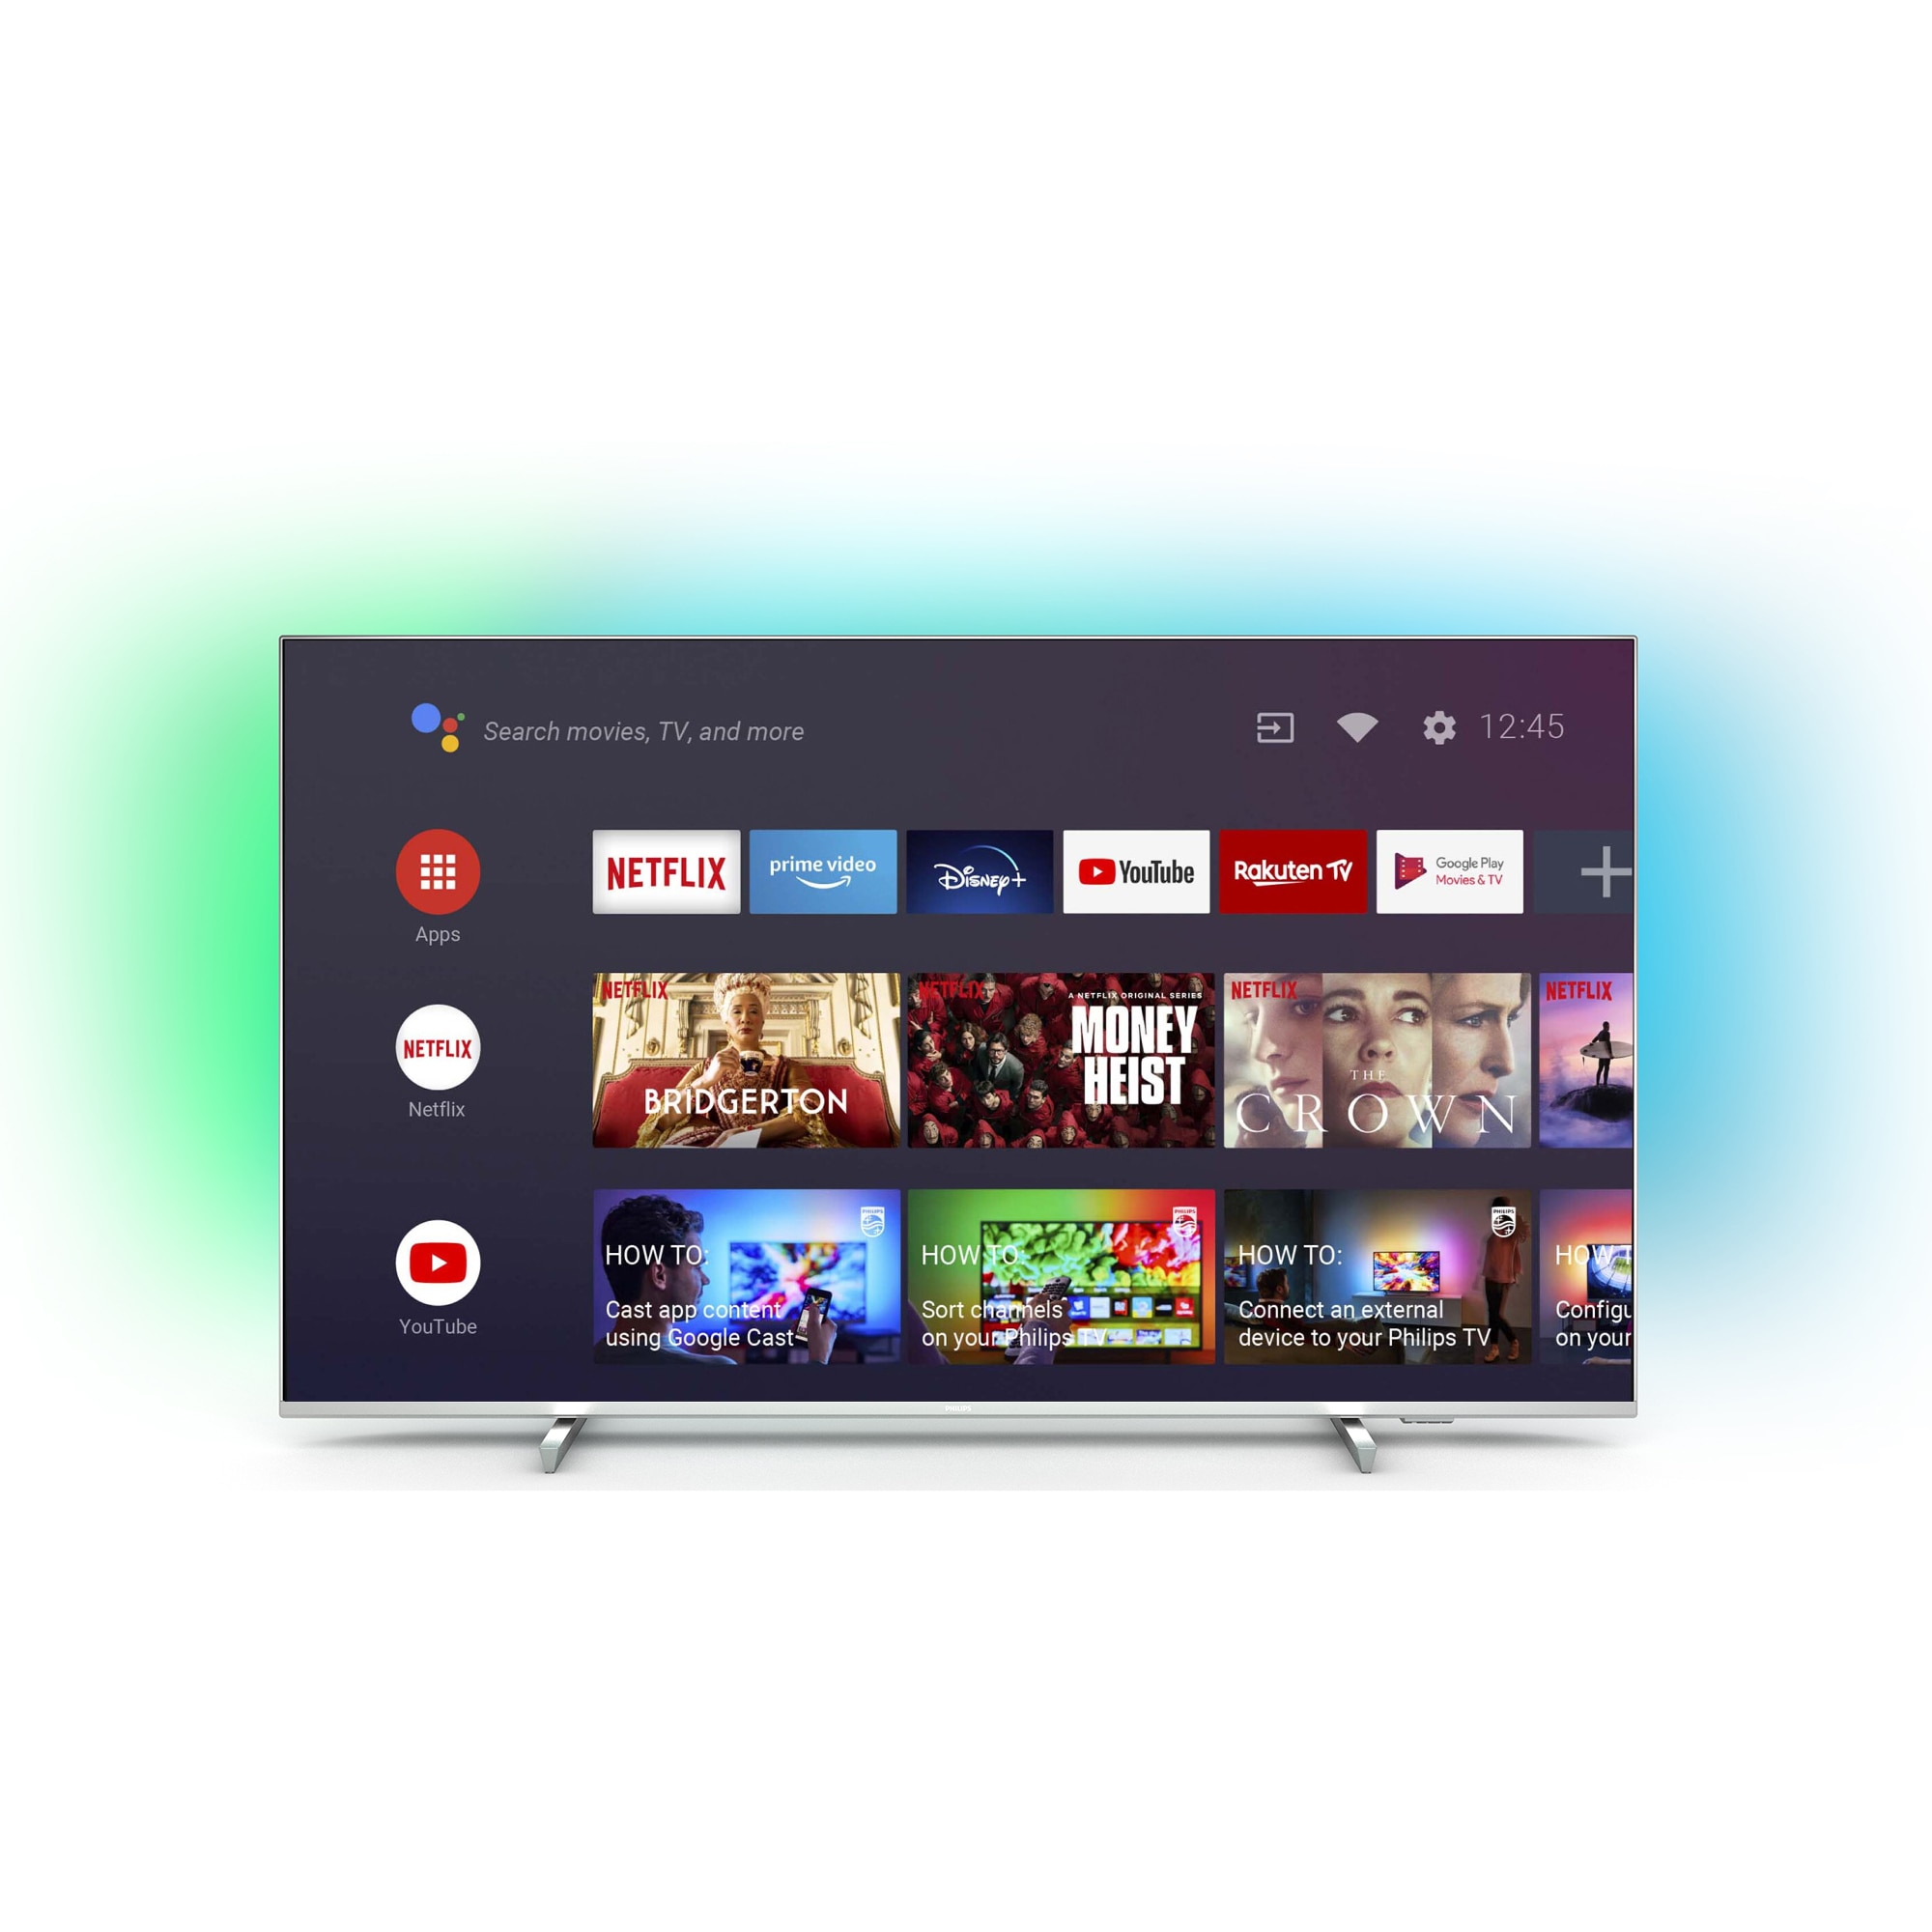 Memorize two weeks compile Televizor Philips, 139 cm, LED, Smart, Android TV, Ambilight, Ultra HD, 4K,  HDR10+, Wi-Fi, Bluetooth, Dolby Vision, HDMI, accesorii incluse, Negru  (55PUS7956/12) | Istoric Preturi